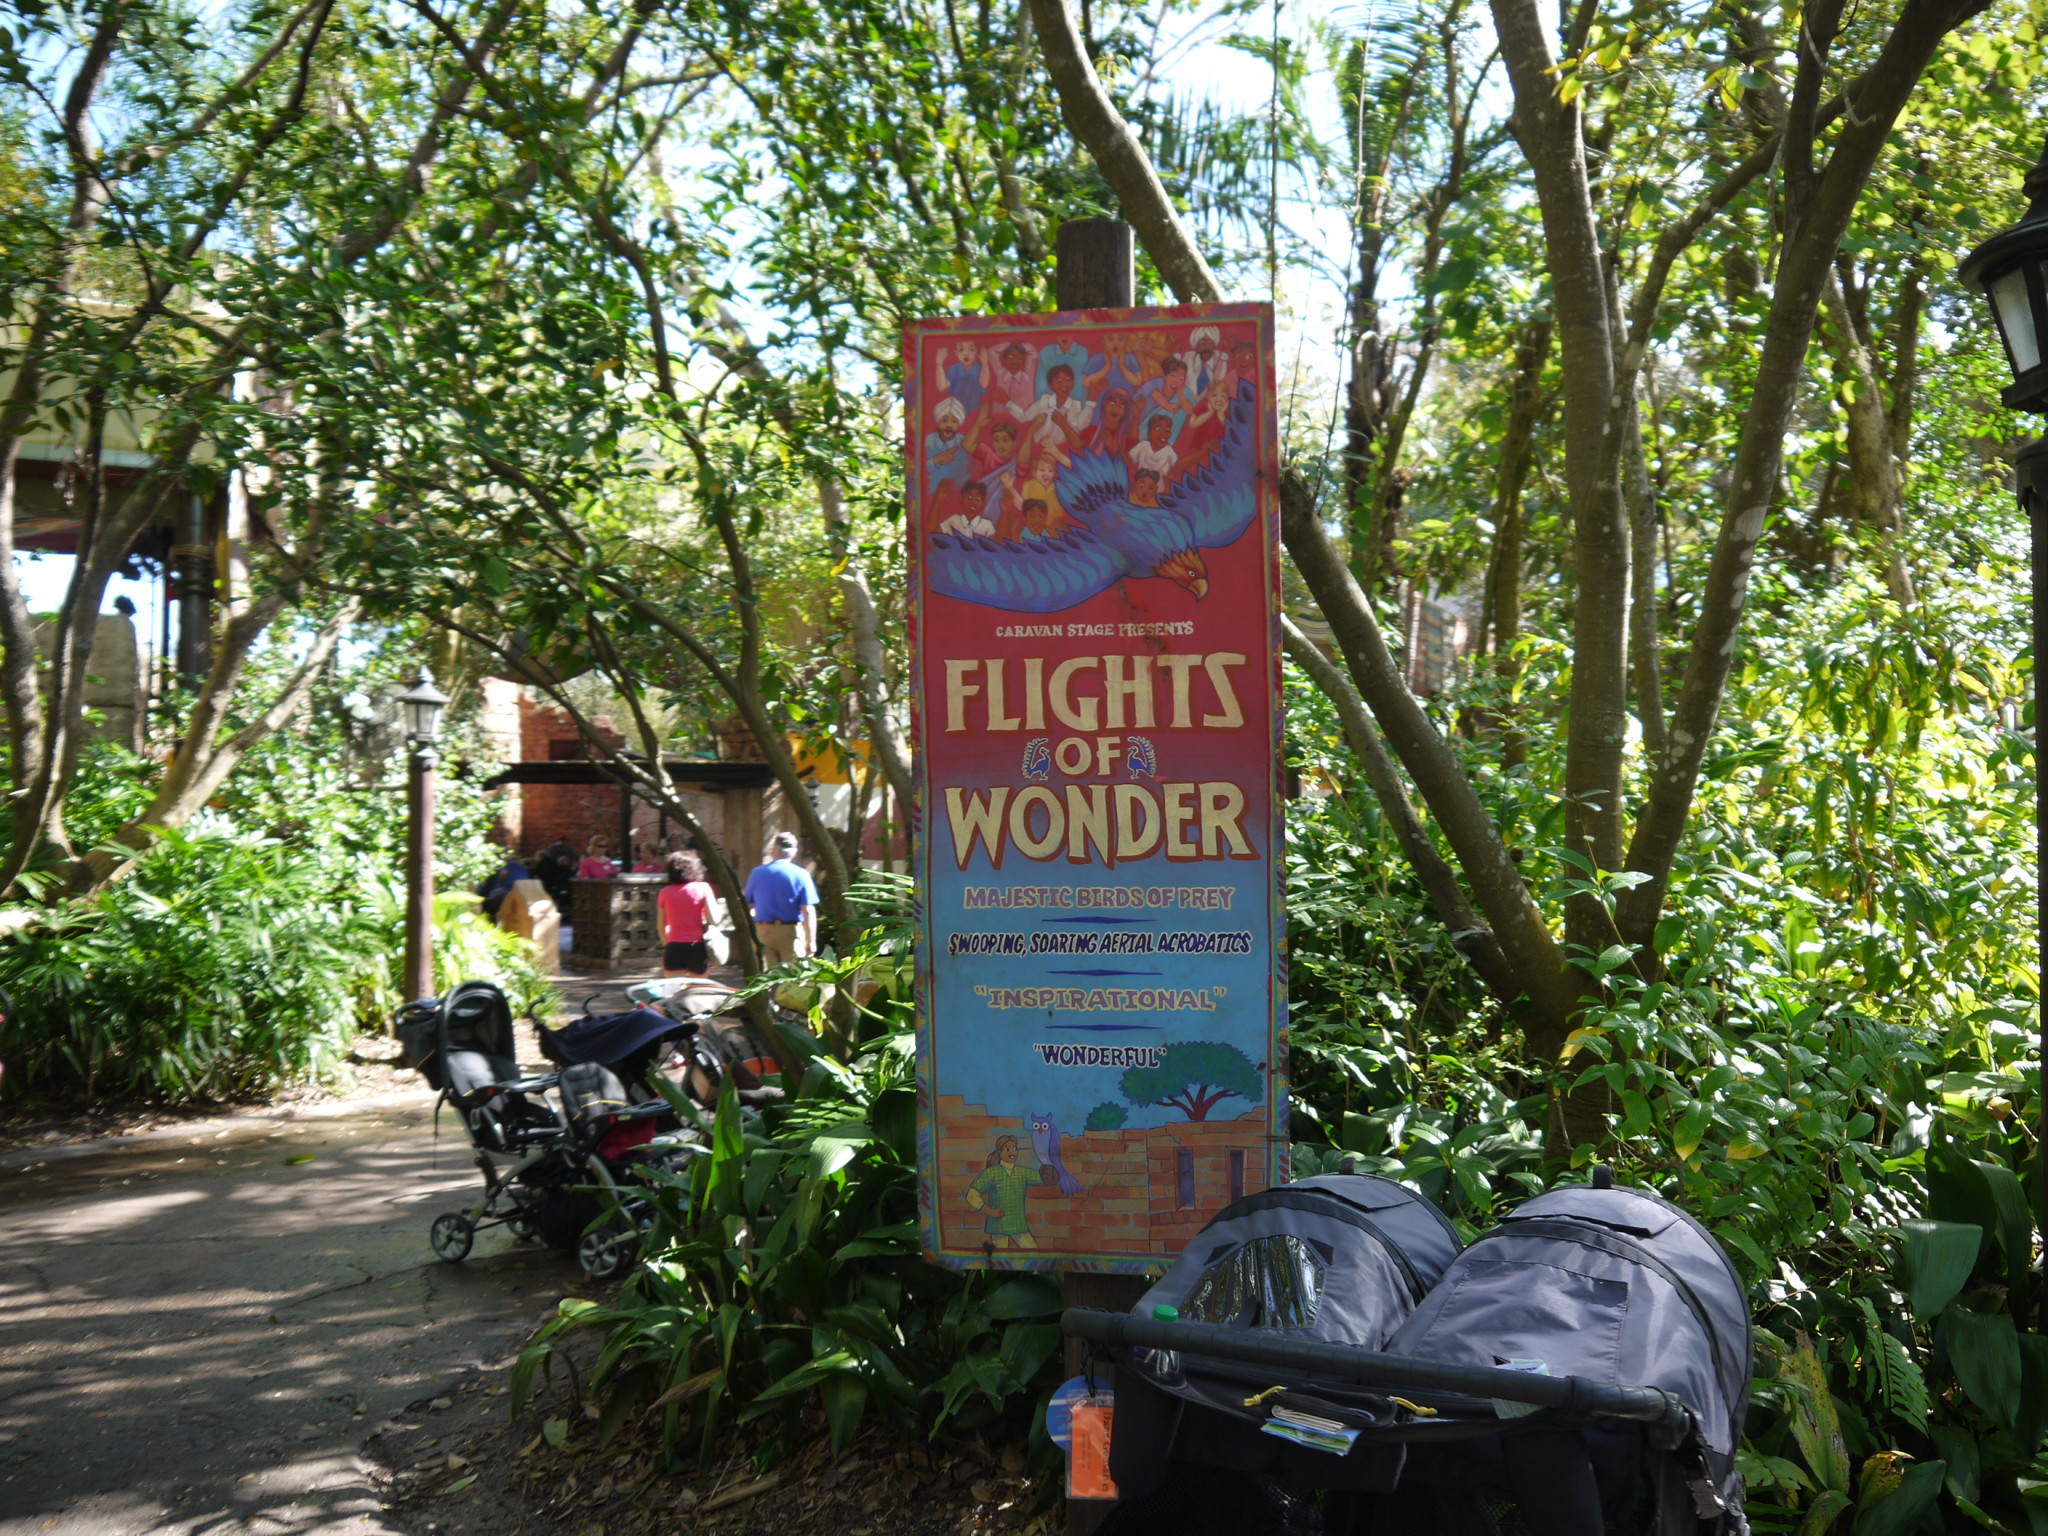 Disney’s Flights of Wonder is closing for Refurbishment to add new roof